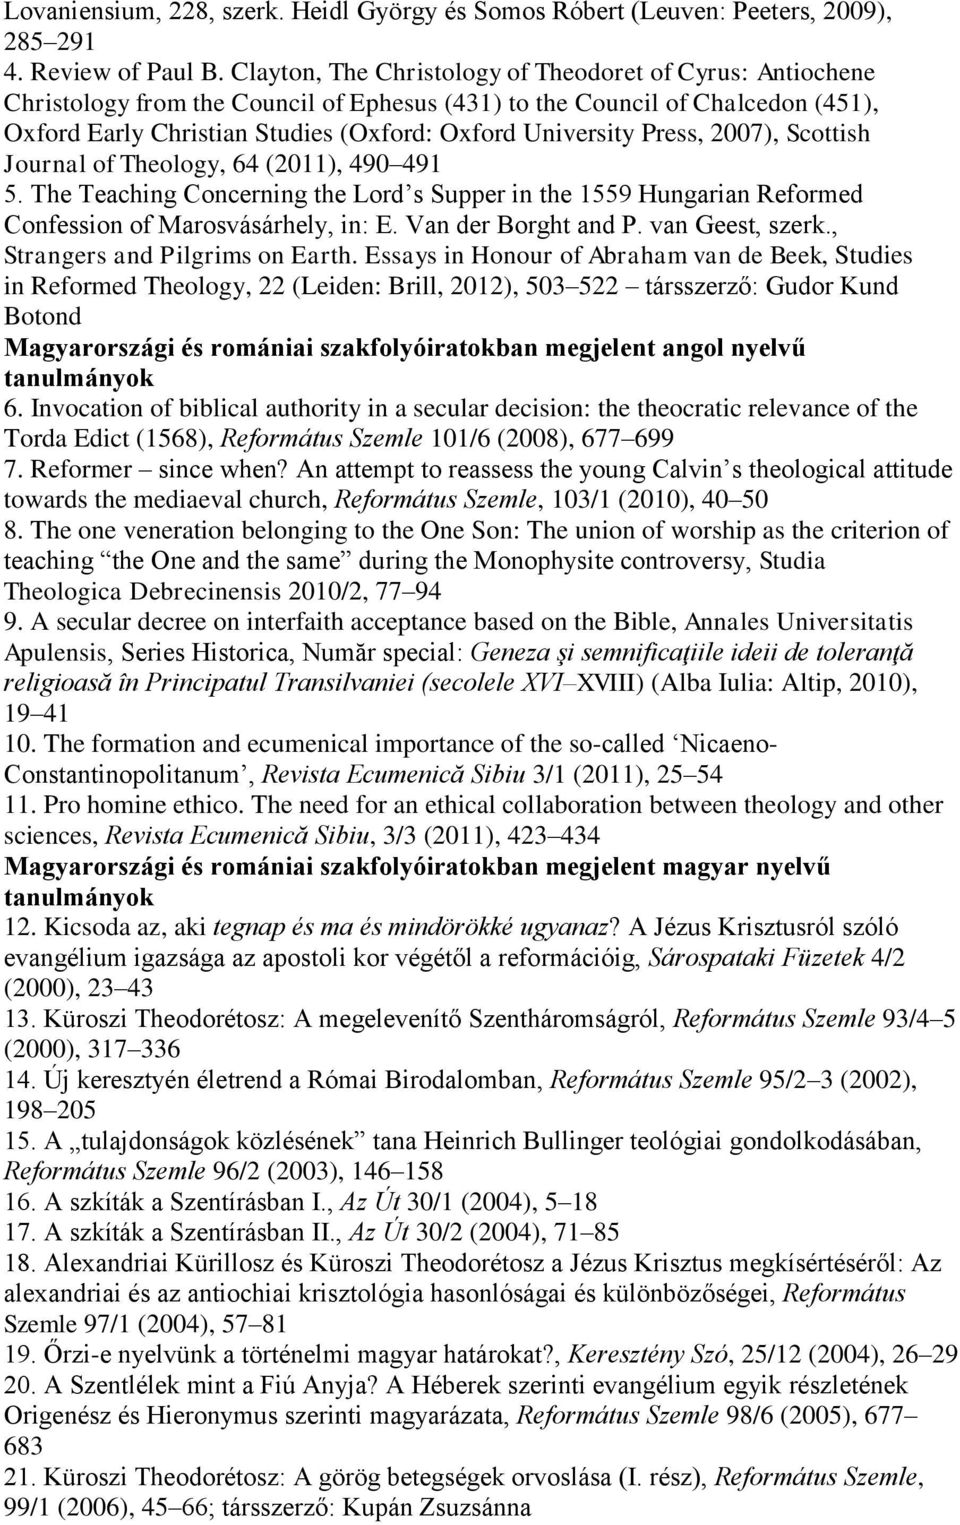 Press, 2007), Scottish Journal of Theology, 64 (2011), 490 491 5. The Teaching Concerning the Lord s Supper in the 1559 Hungarian Reformed Confession of Marosvásárhely, in: E. Van der Borght and P.